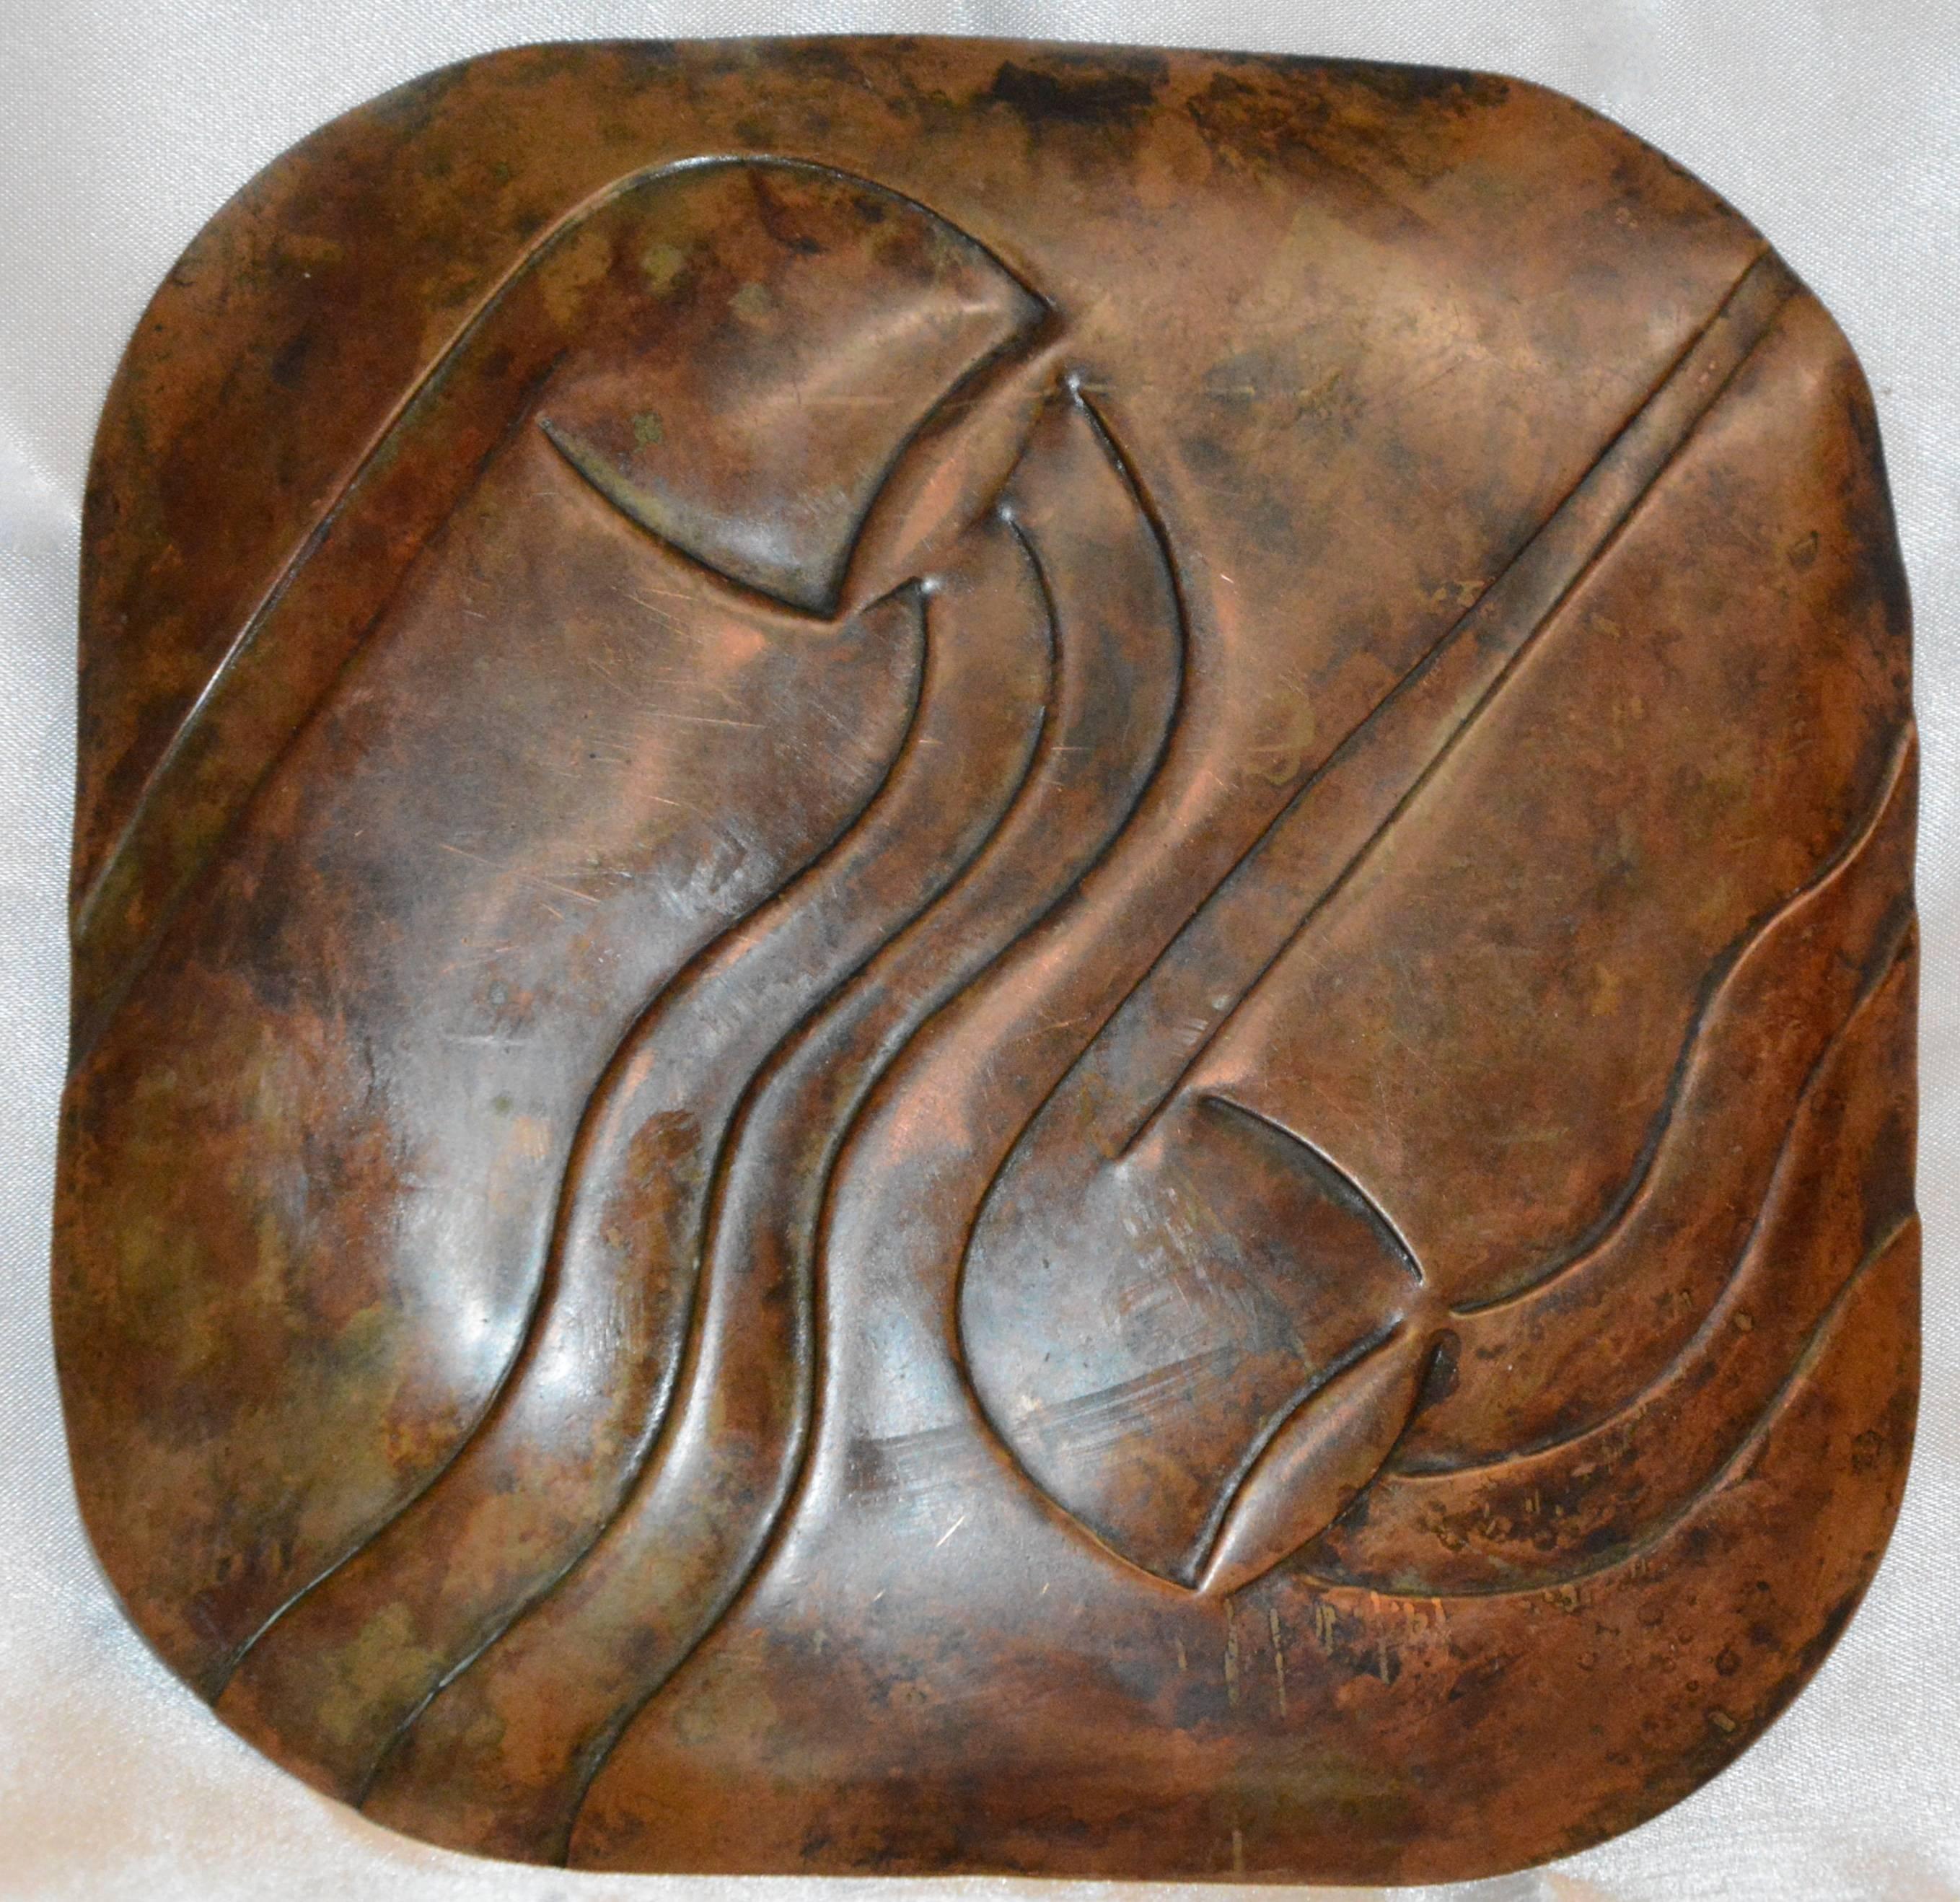 This is a unique piece of vintage artisan copper decor. Featured is a Francisco Rebajes midcentury copper tray with Art Deco inspired engraved pipe design. It is marked “Rebajes” to one edge. It has a beautiful, aged patina.